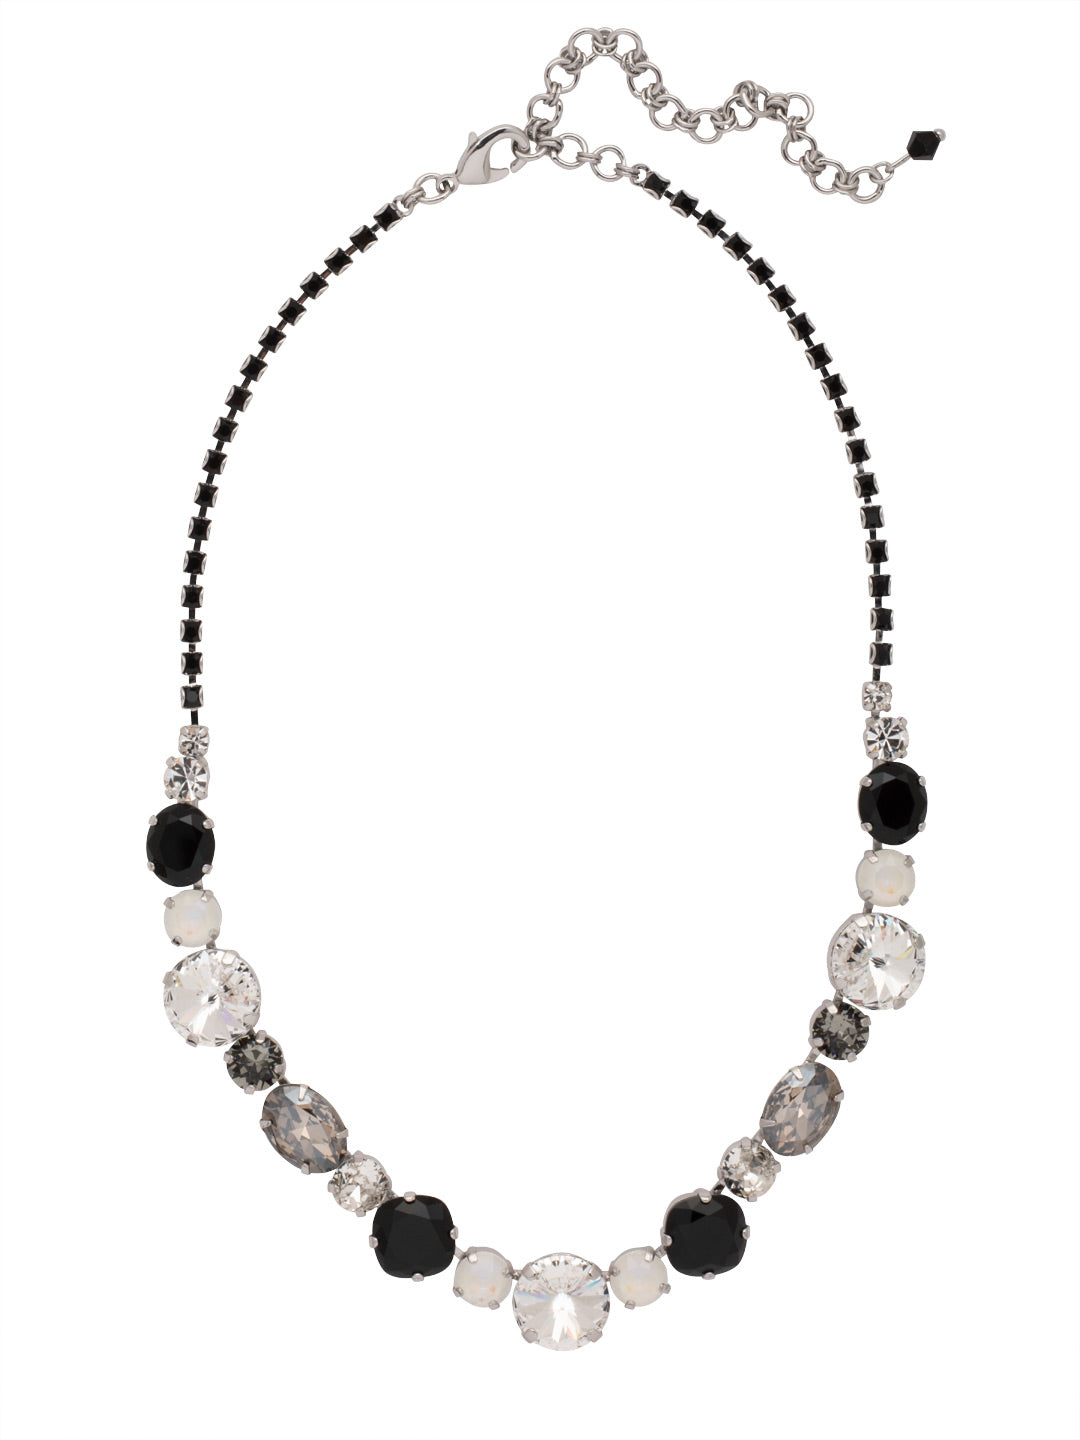 Full Circle Statement Necklace - NDQ43PDSNI - <p>Need a look that goes full circle? Three circular rivoli crystals mix with other round and oval gems in this everyday stunner. A rhinestone chain completes the look for all-around allure. From Sorrelli's Starry Night collection in our Palladium finish.</p>